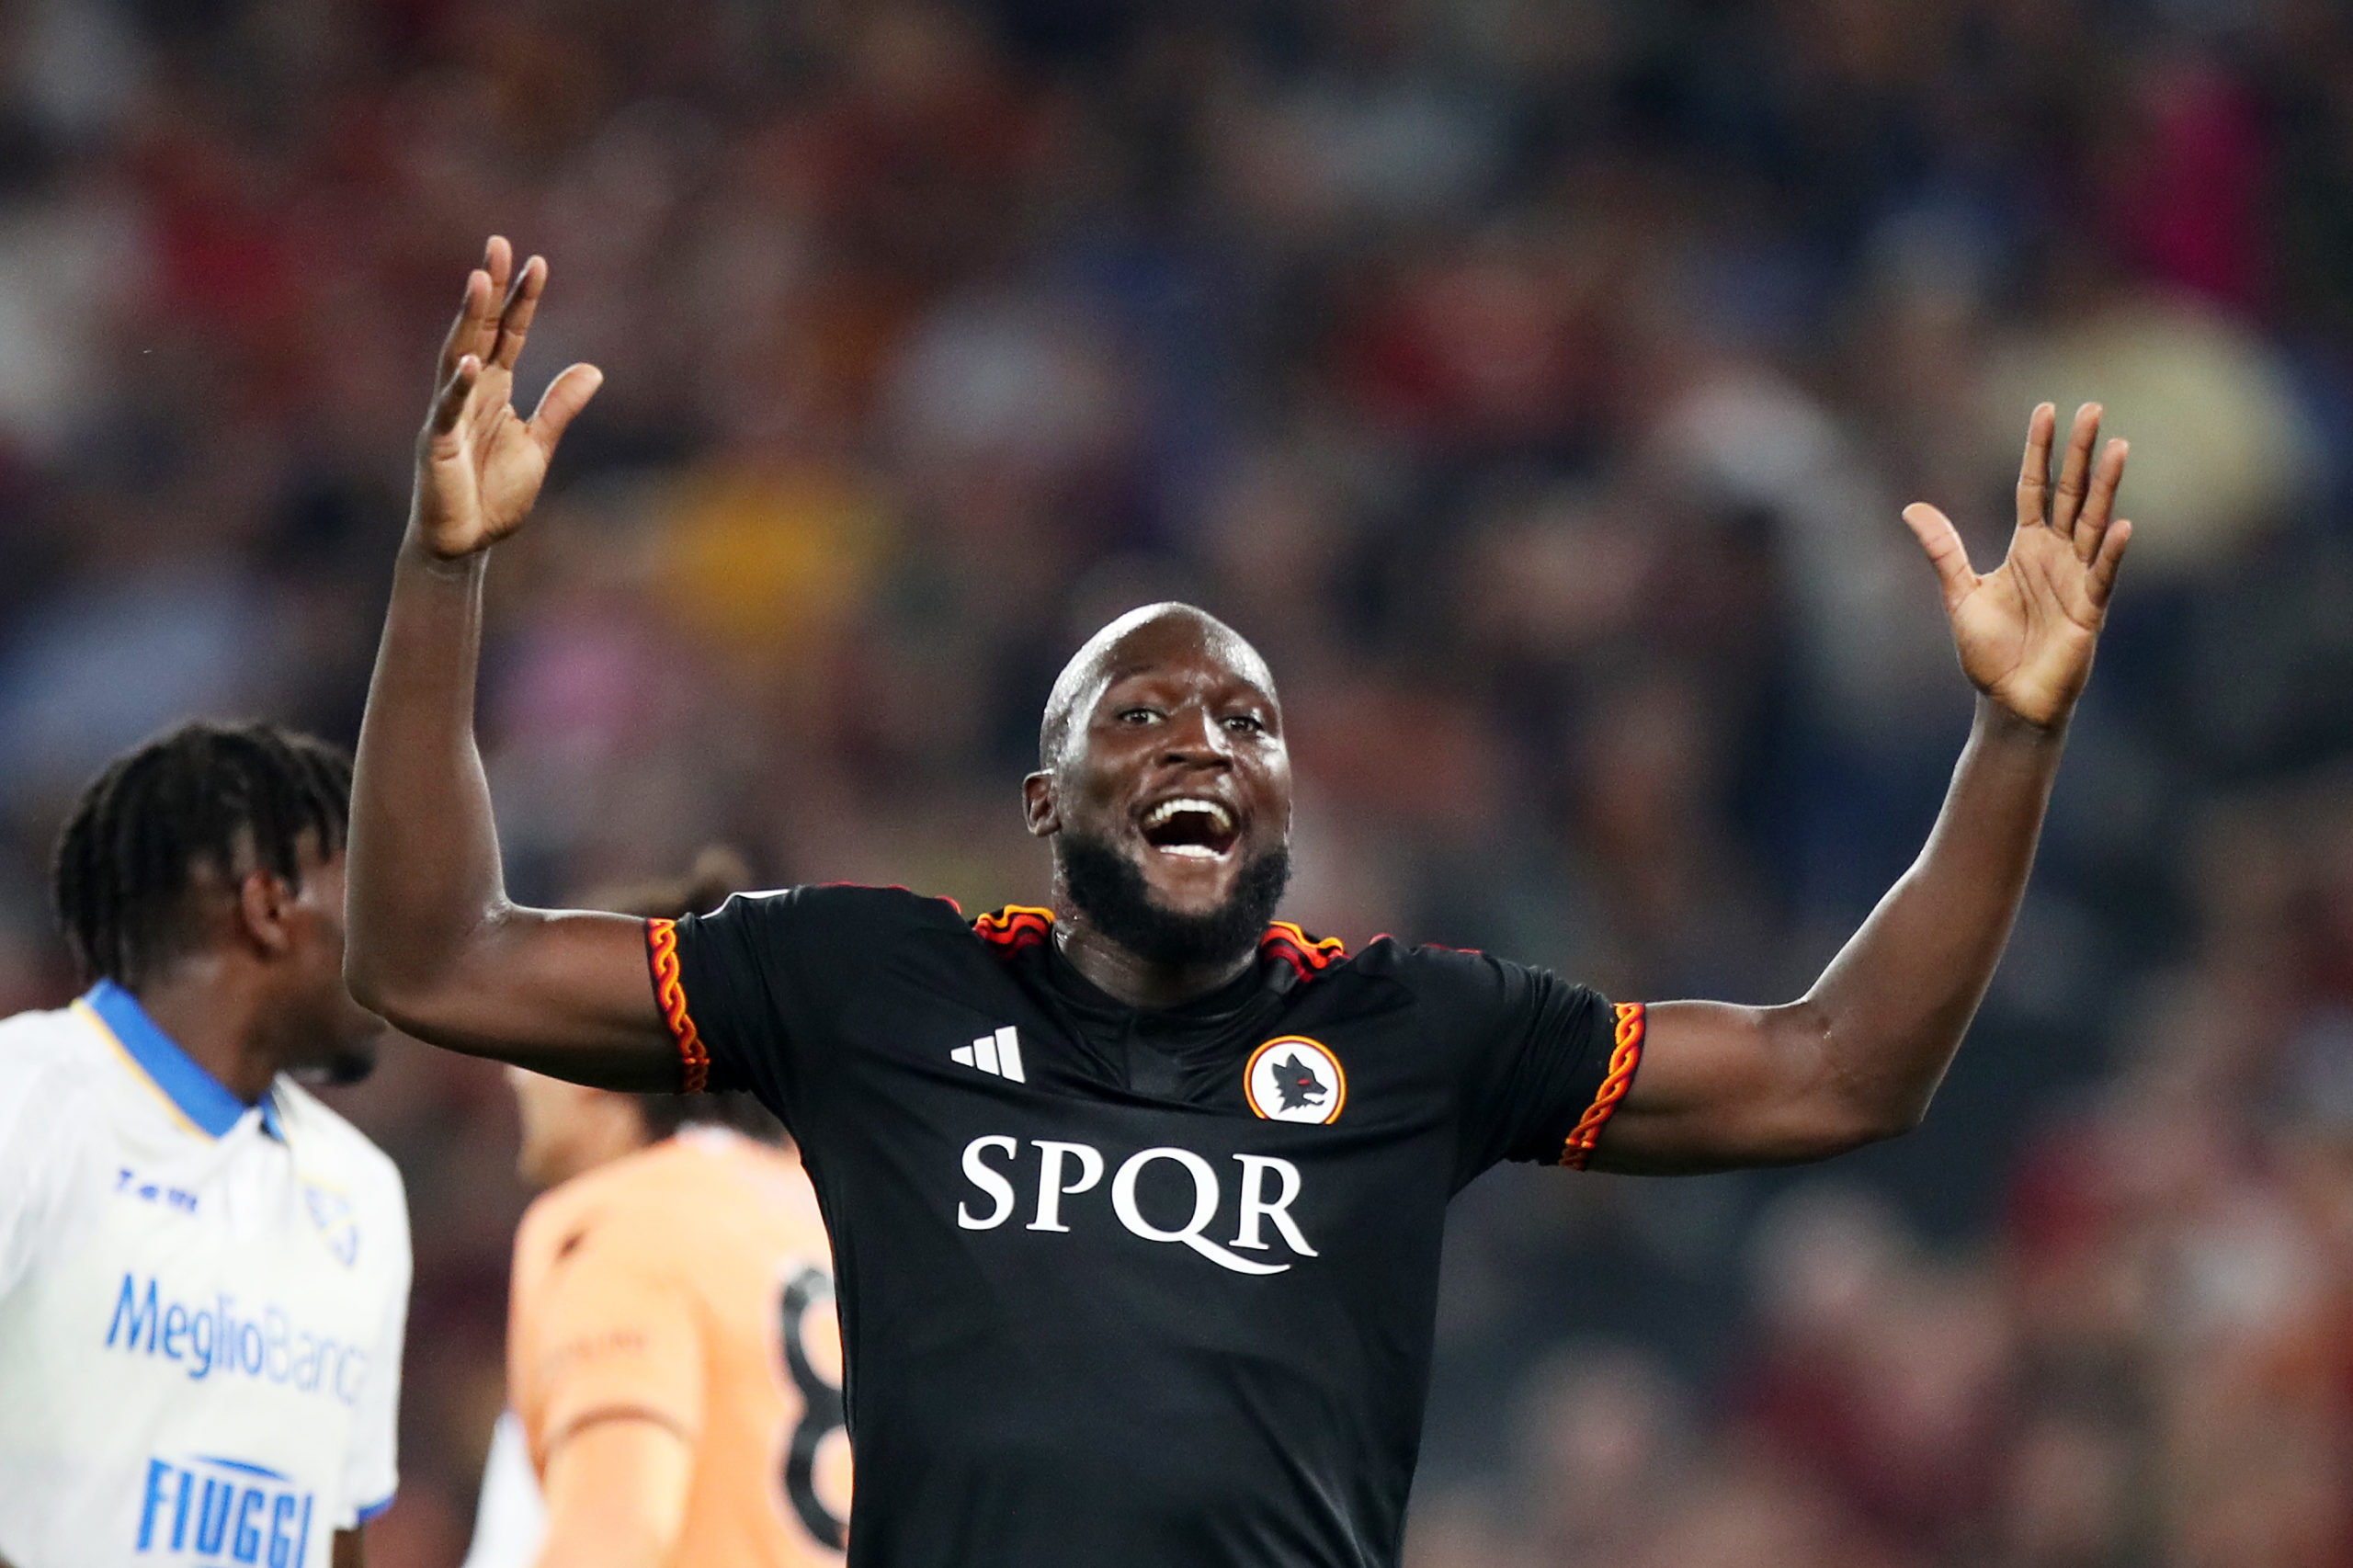 Lukaku arrived following a loan deal and has already taken strides in the Italian capital. Chelsea are in line to make more than €40M on transfer fees.